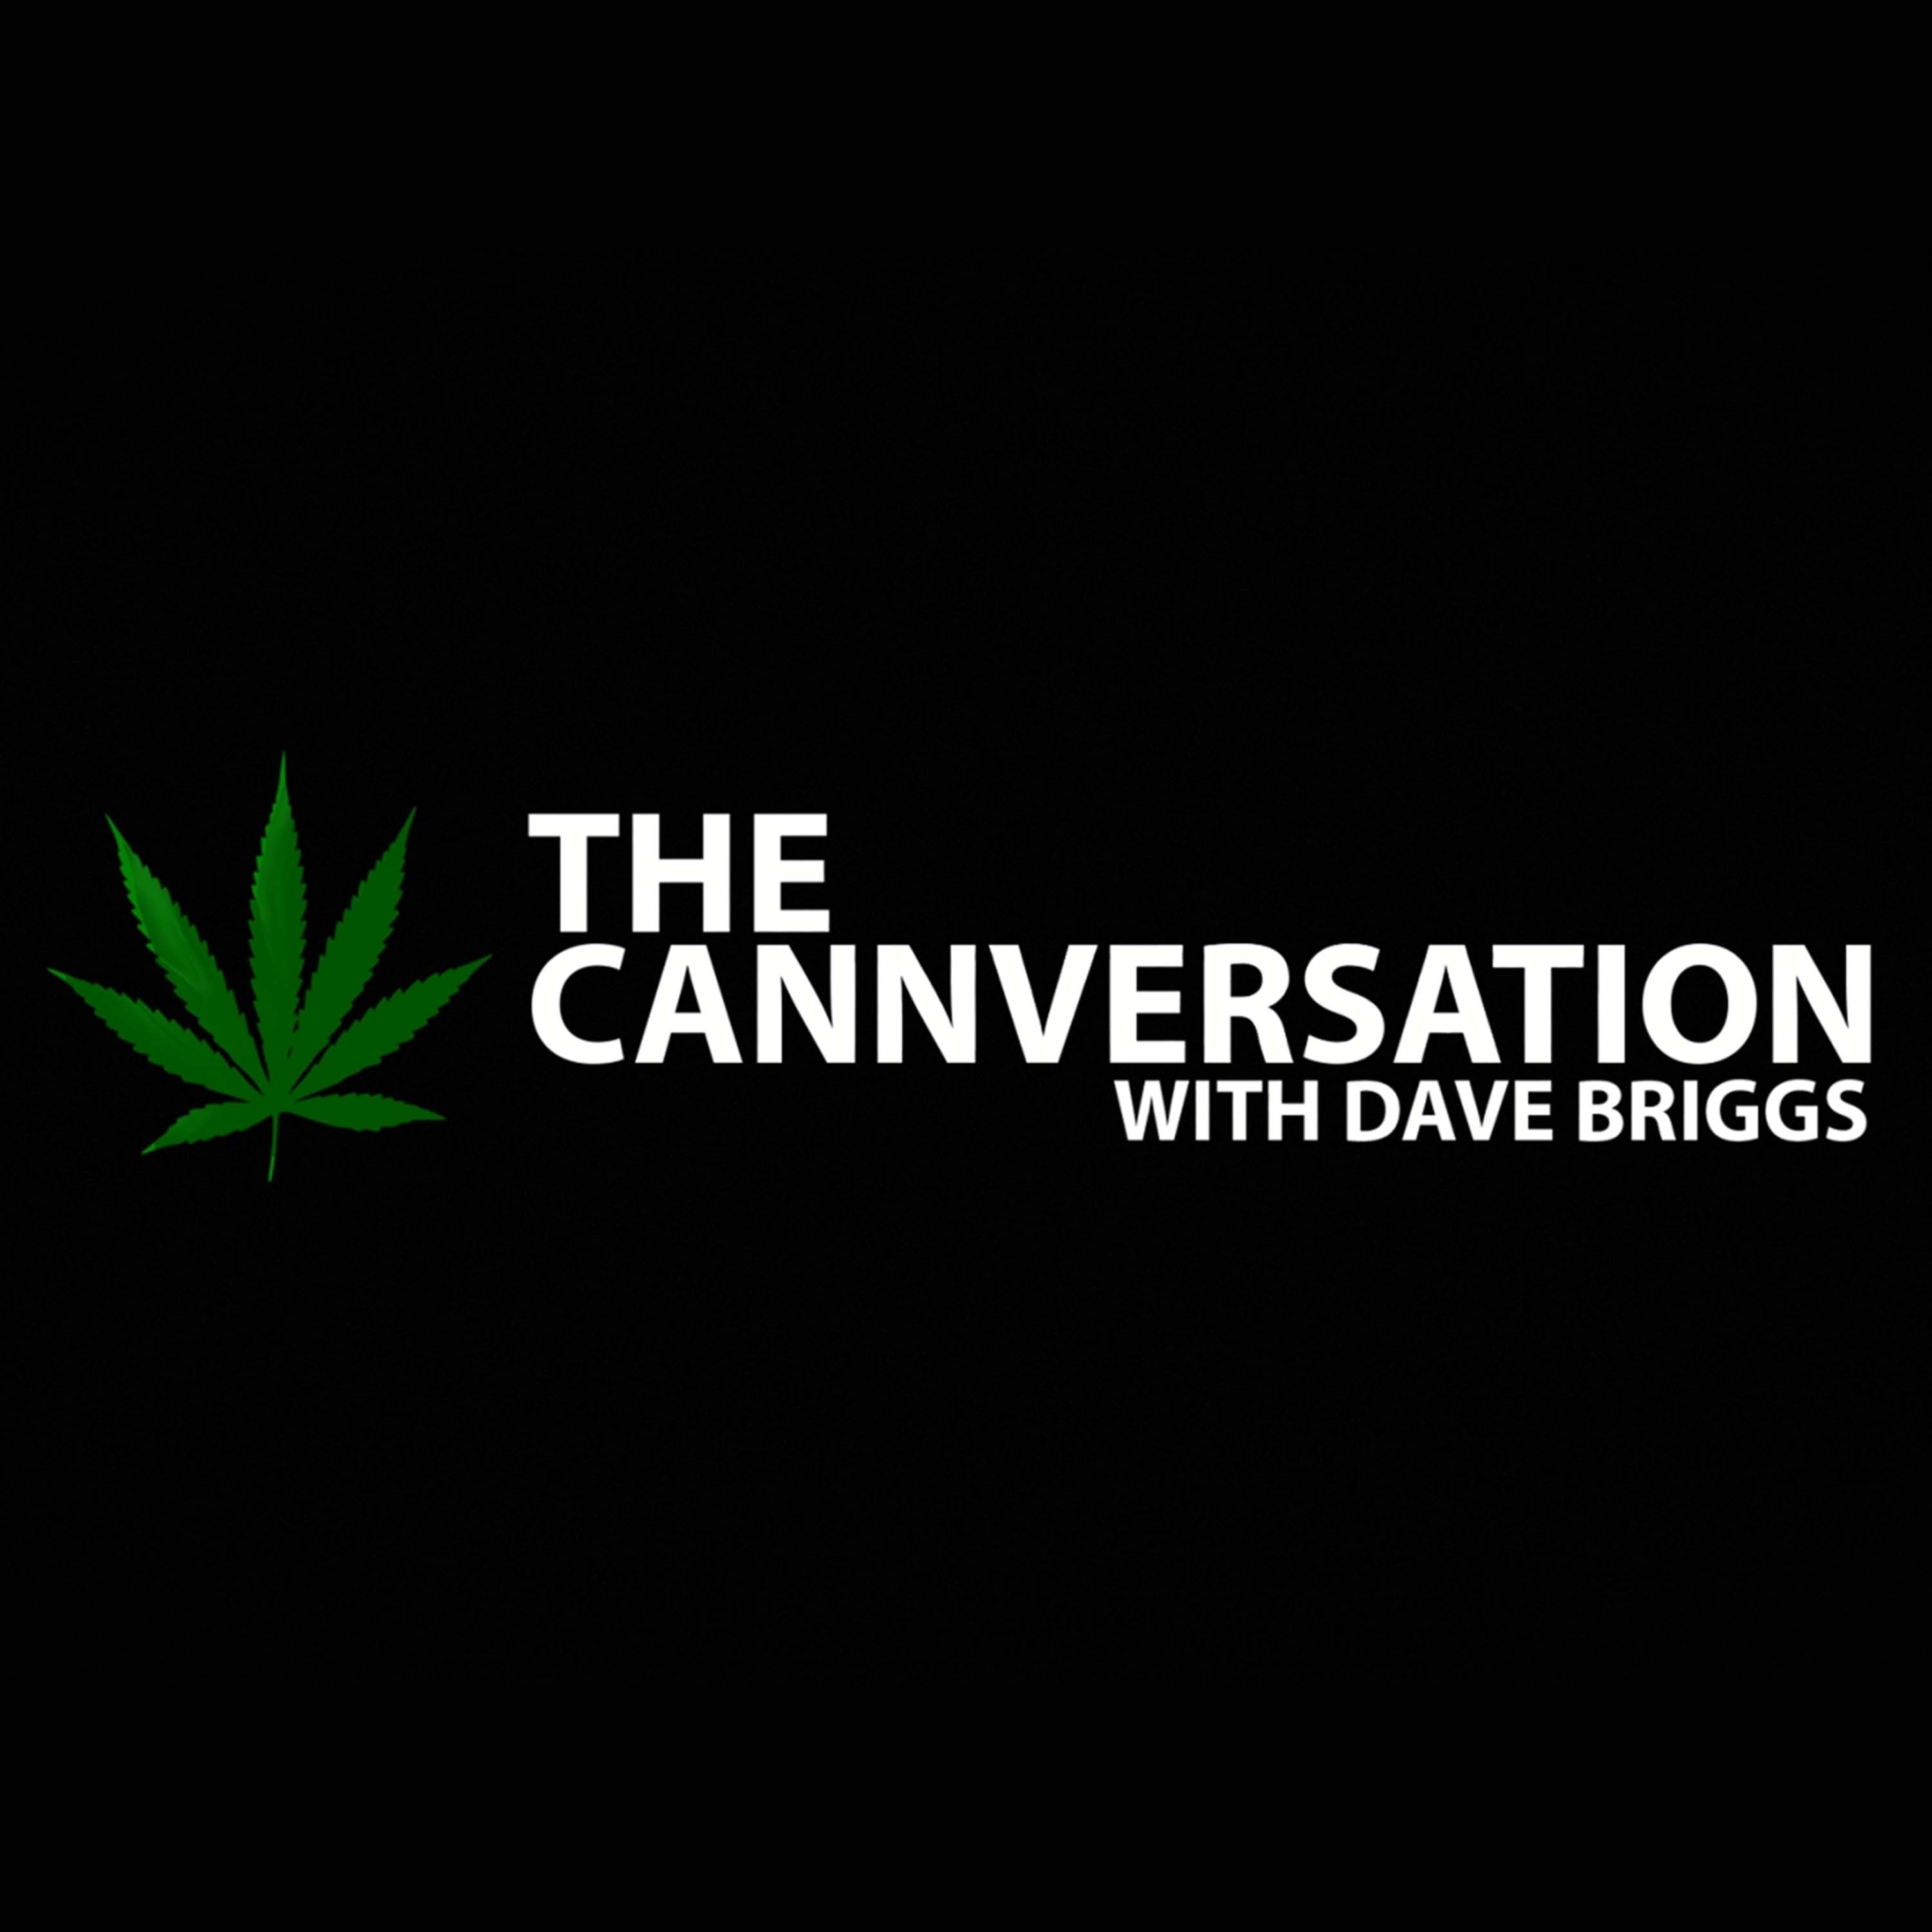 Artwork for podcast The Cannversation with Dave Briggs